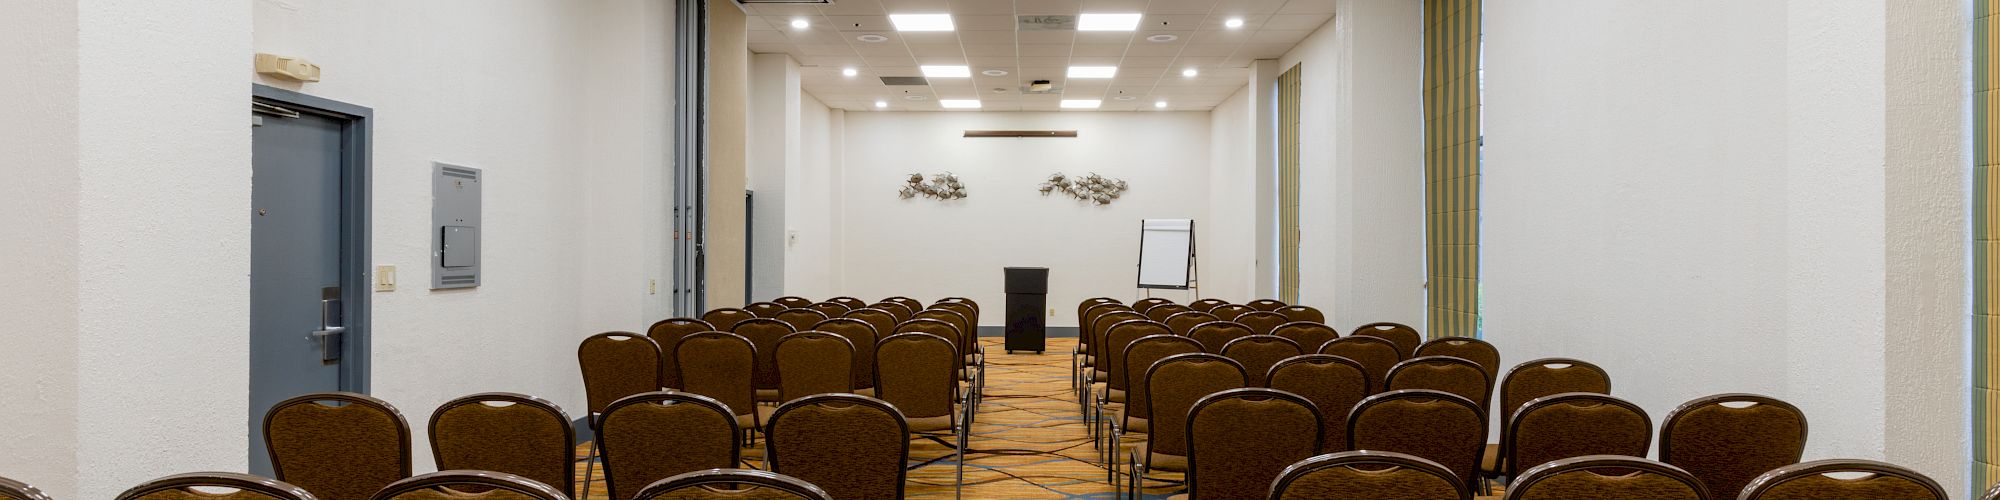 The image shows a conference room with rows of chairs facing a podium, whiteboard, and a decorated wall. The room has a carpeted floor.